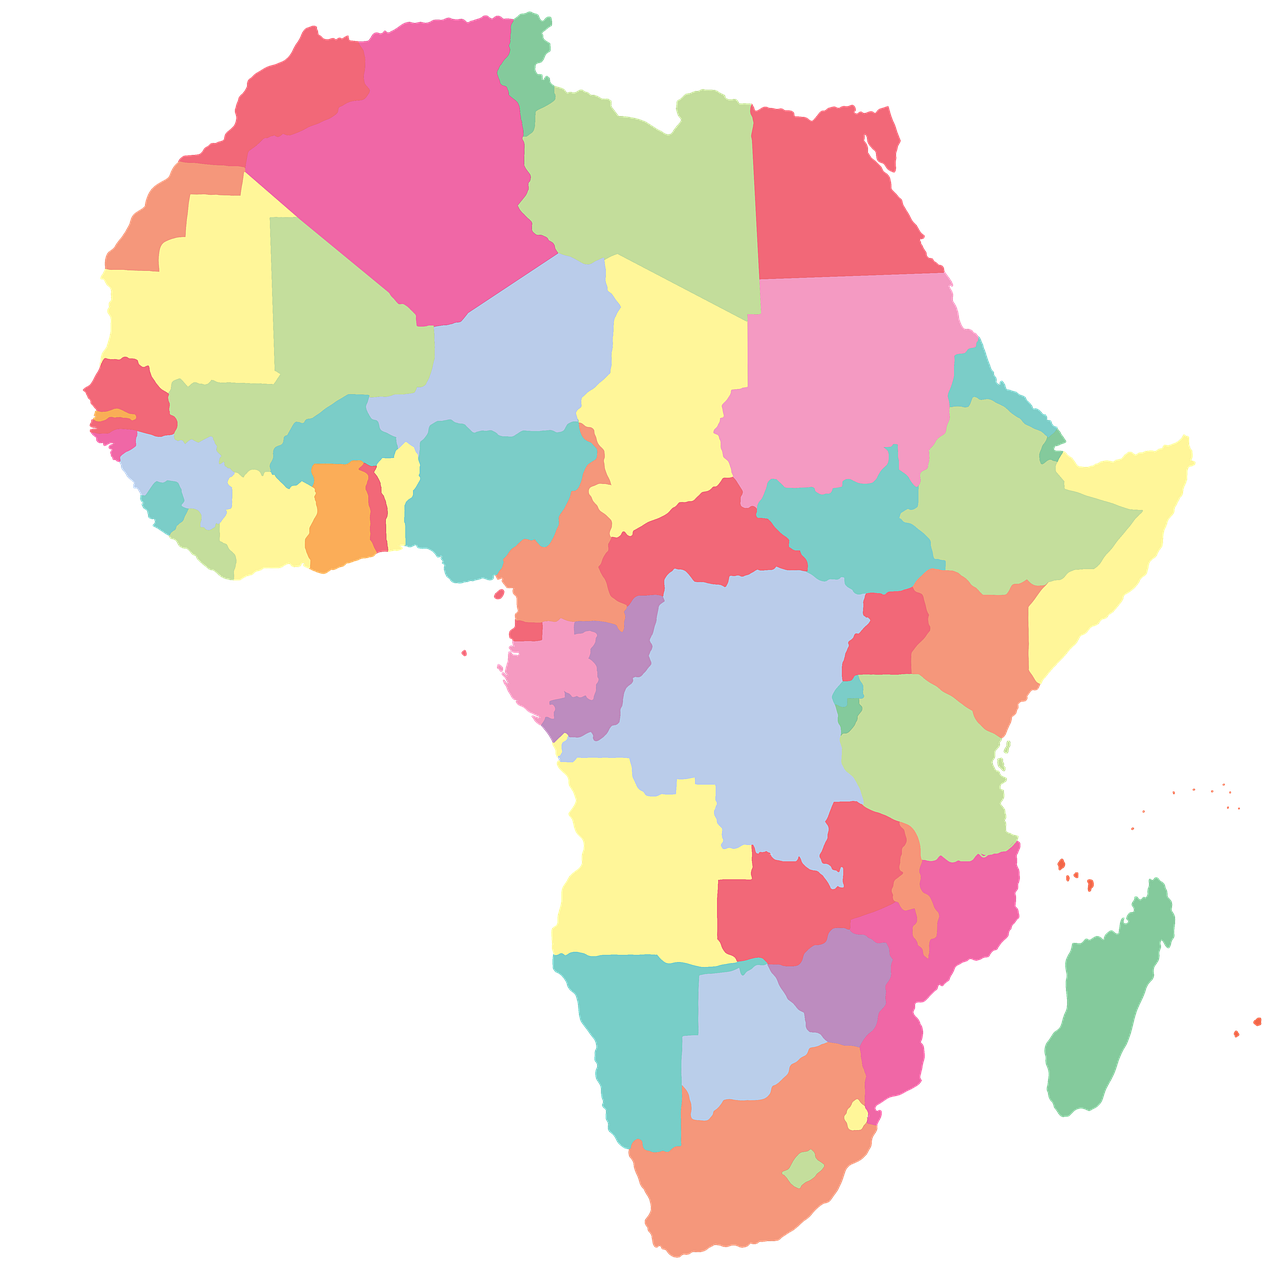 colorful map of African continent and Madagascar. Countries appear in different pastel colors.